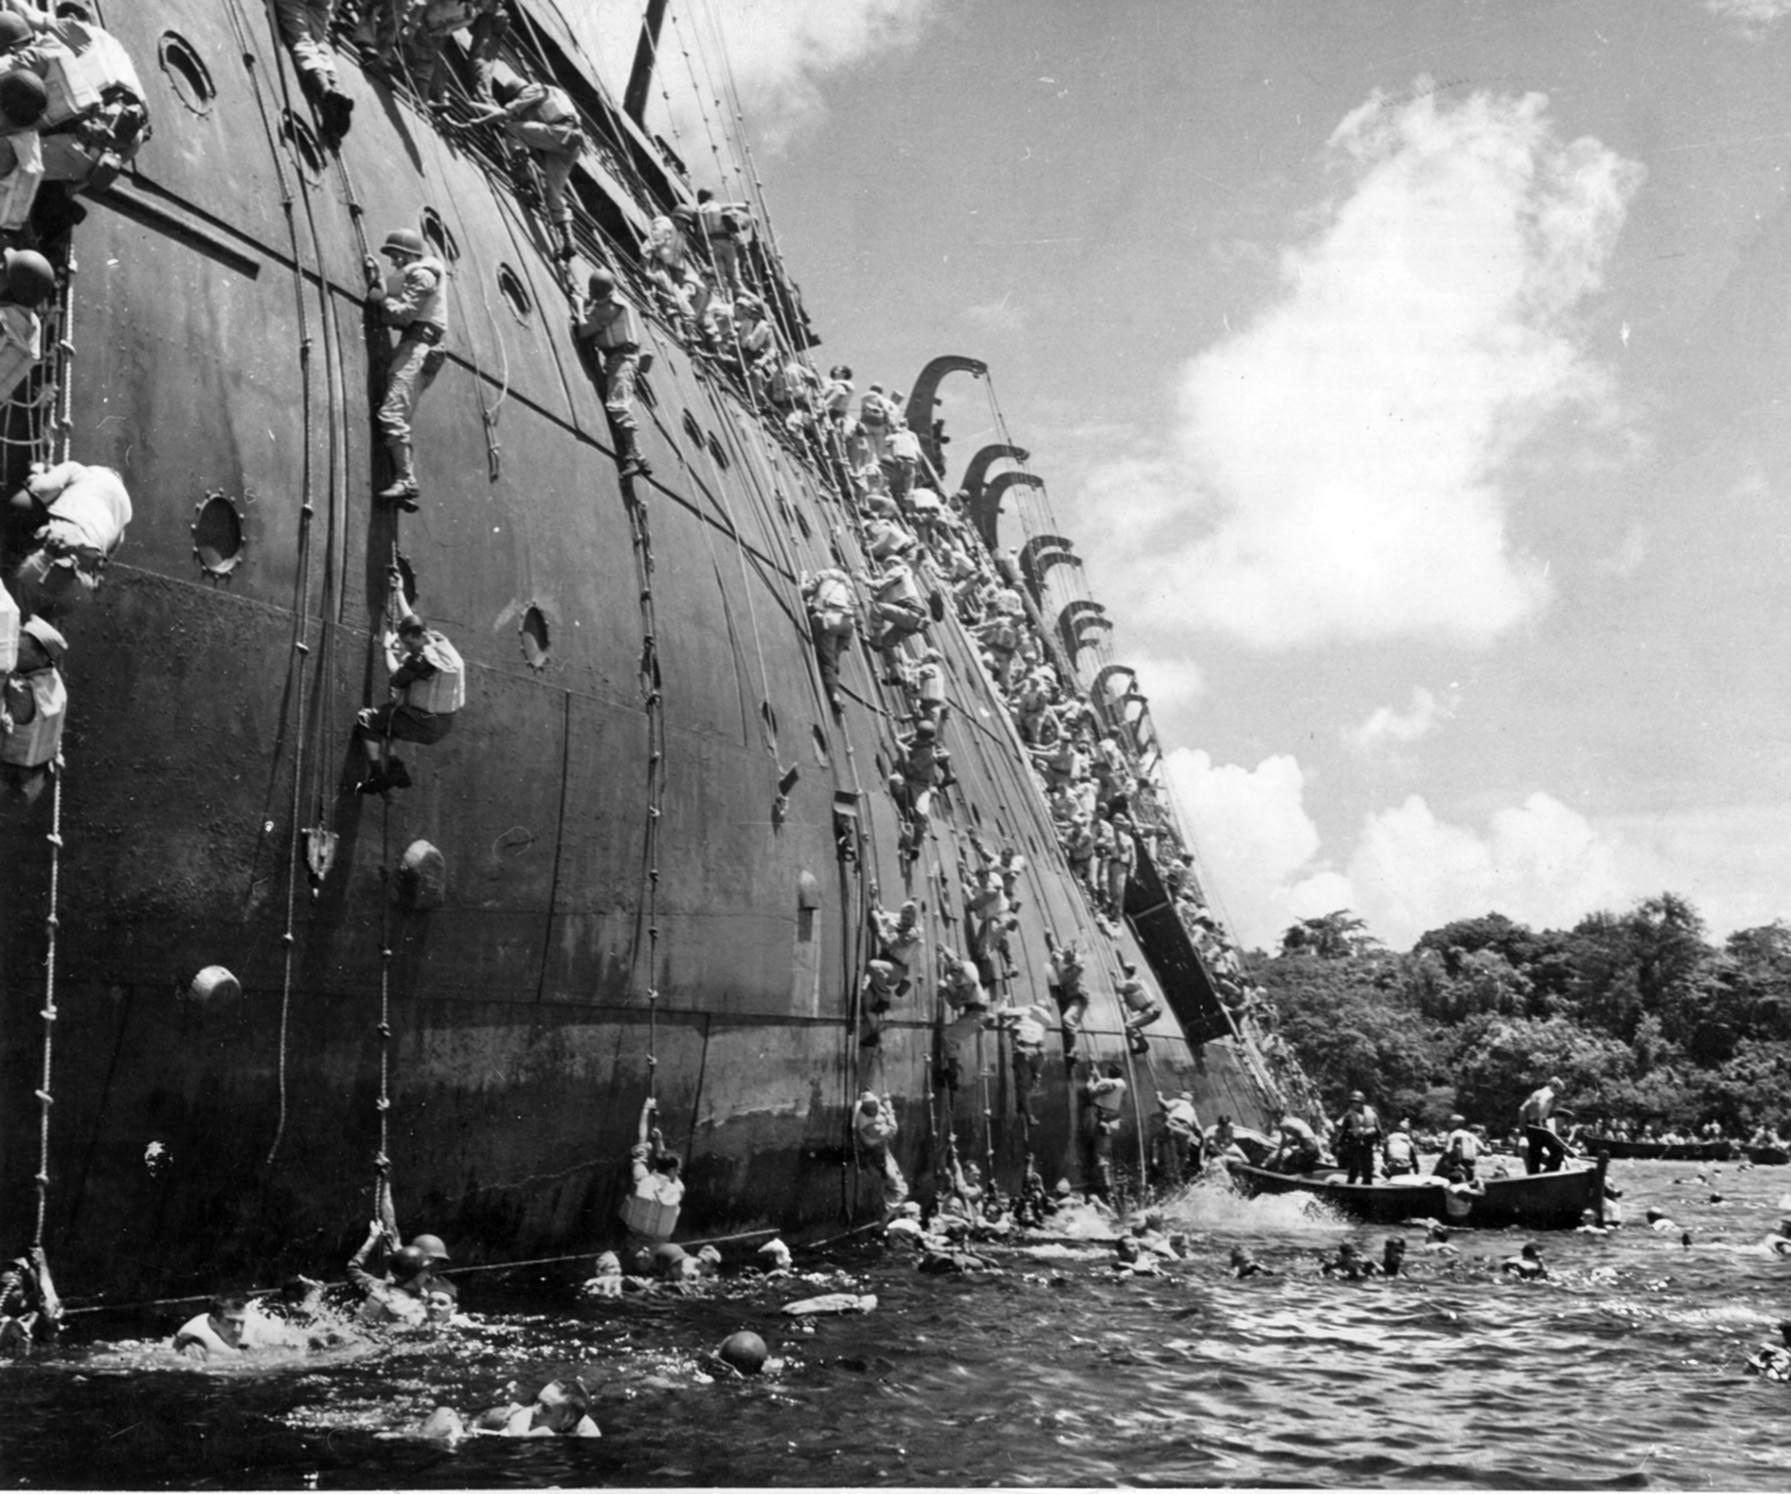 Men scramble down ropes hastily thrown from the foundering troop transport SS  President Coolidge, which struck a mine in the harbor of Espiritu Santo in October 1942.